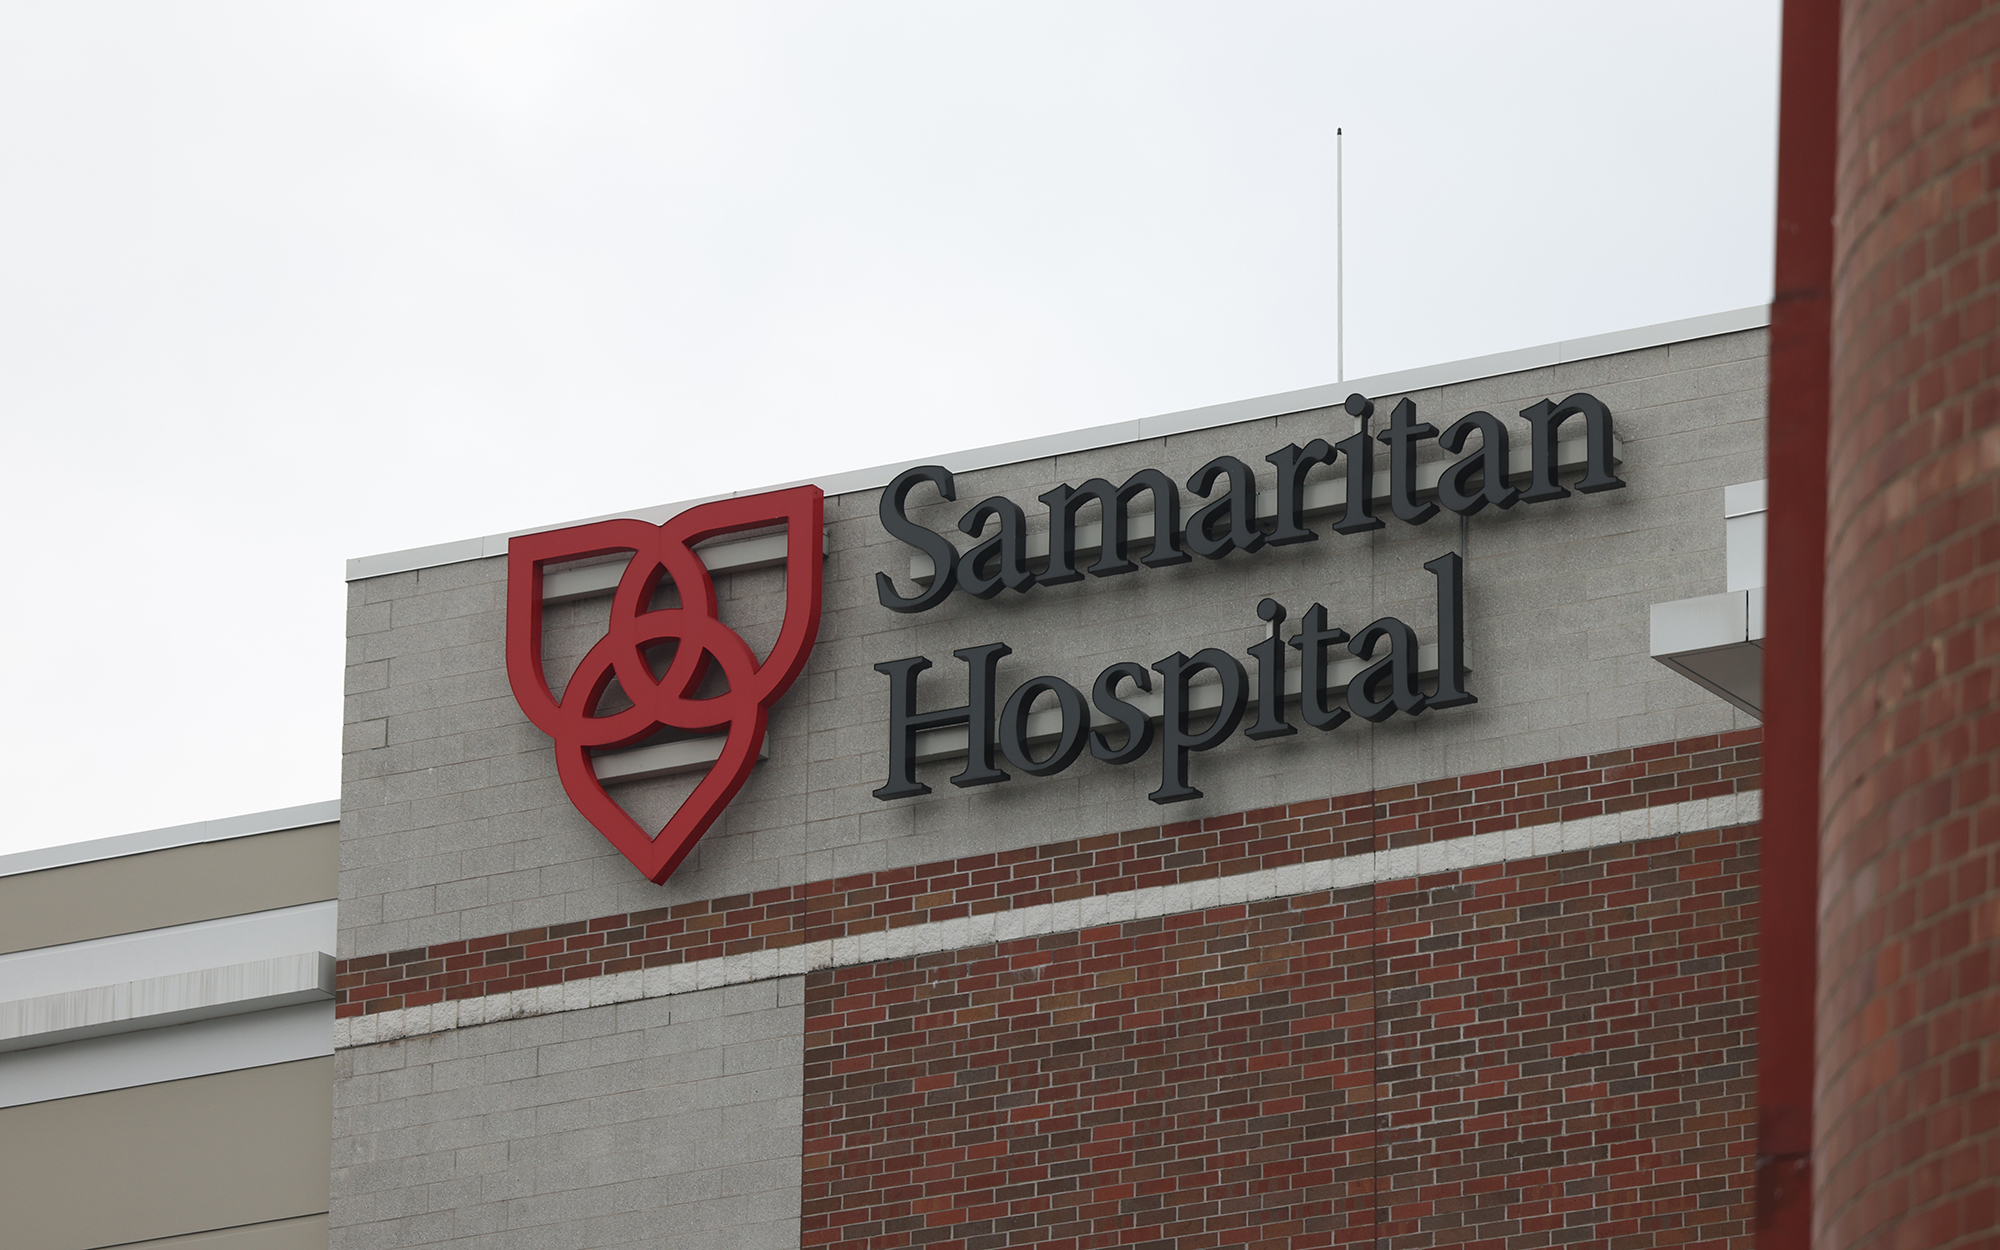 For many years, Burdett Birth Center operated independently. Then it was absorbed into Samaritan Hospital, which is run by St. Peter’s Health Partners. St. Peter’s CEO, Dr. Steven Hanks, says the company remains committed to offering prenatal and postnatal services. (Photo by Morgan Casey/News21)